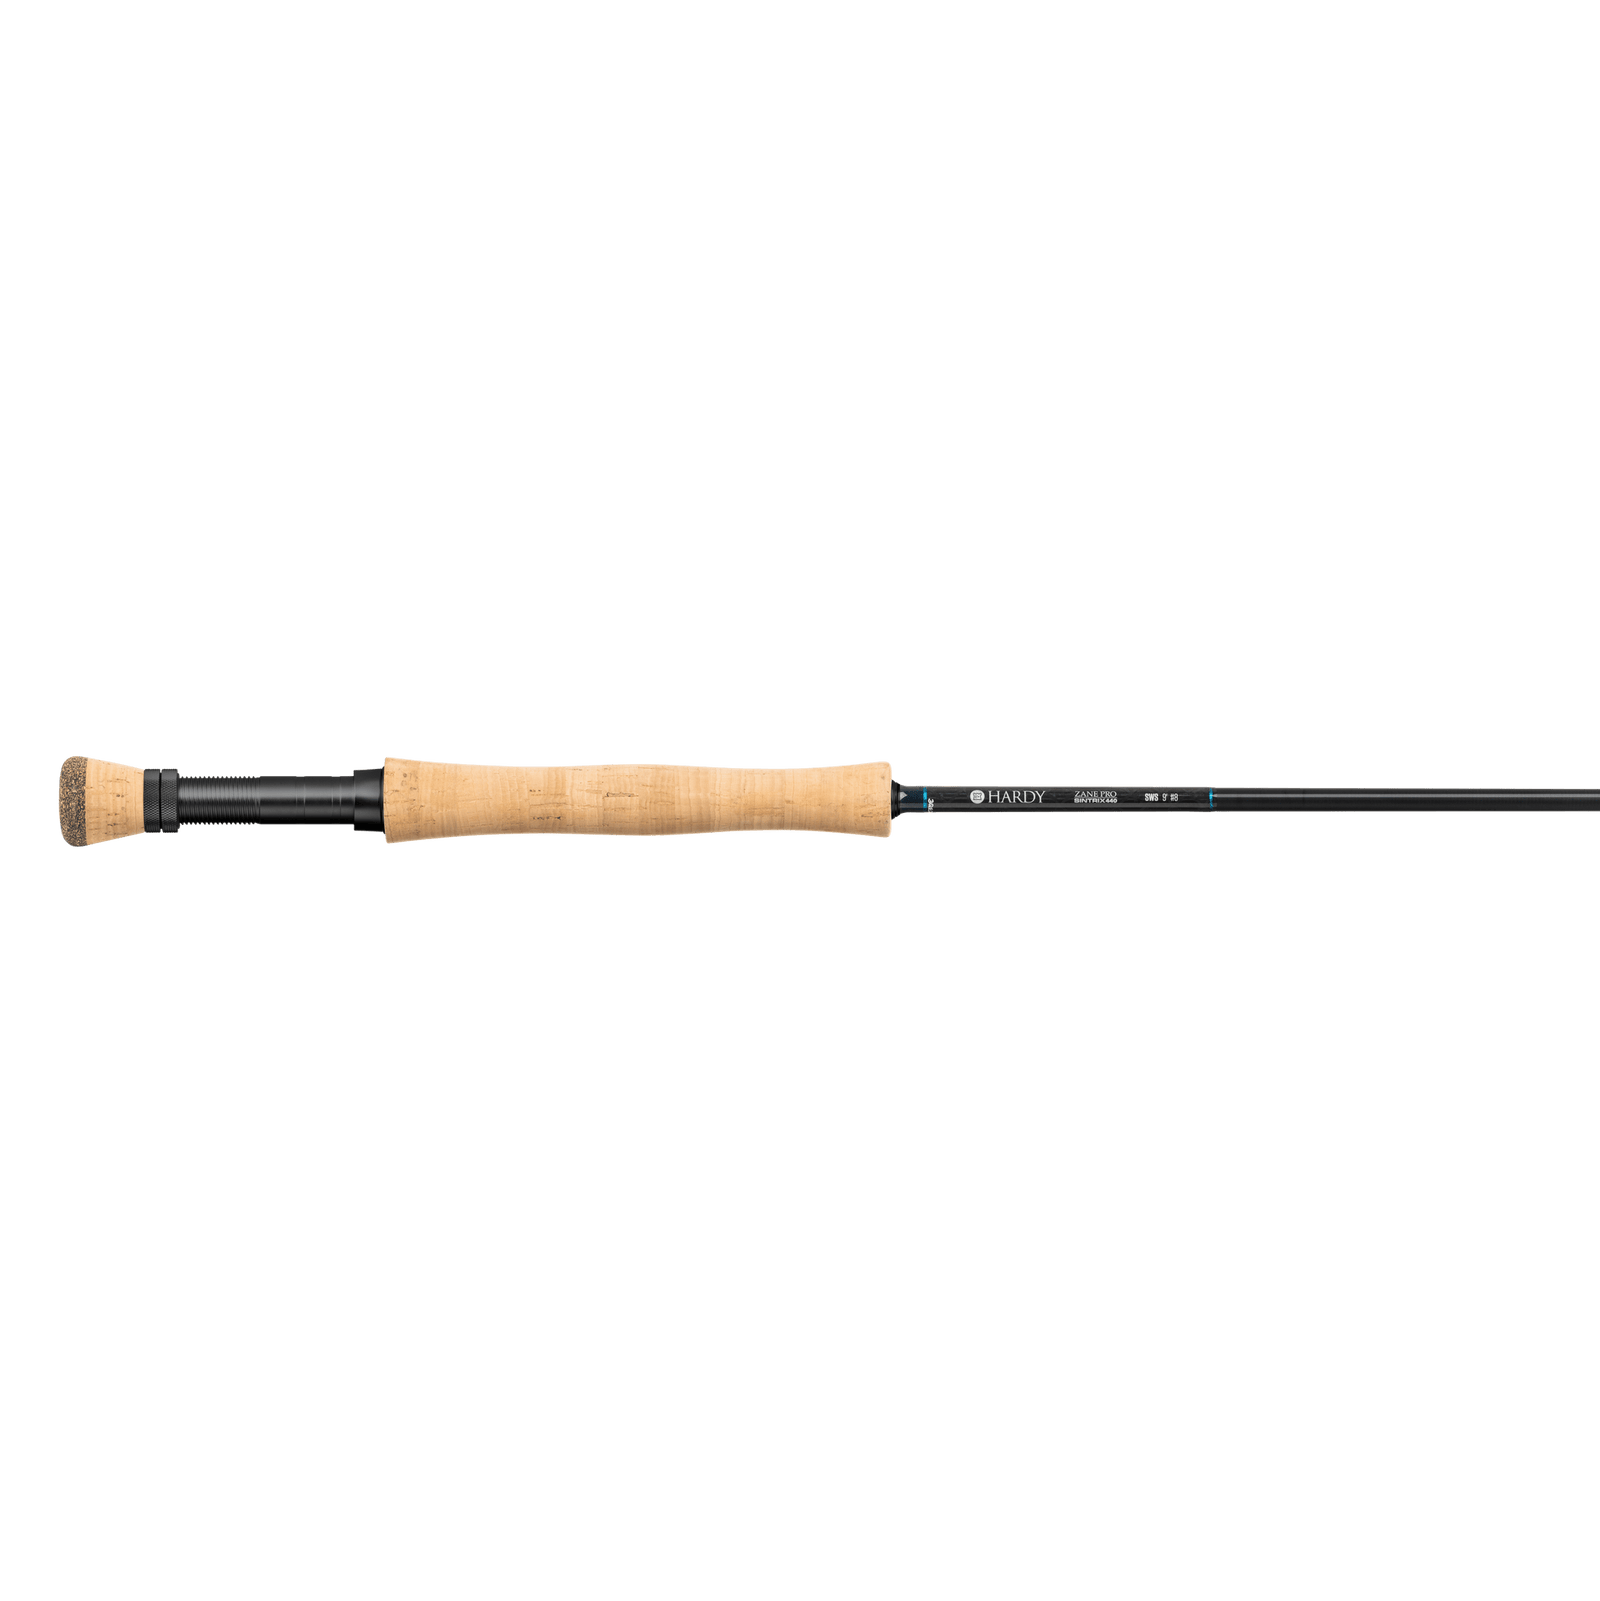 Fly Rods - The Saltwater Edge